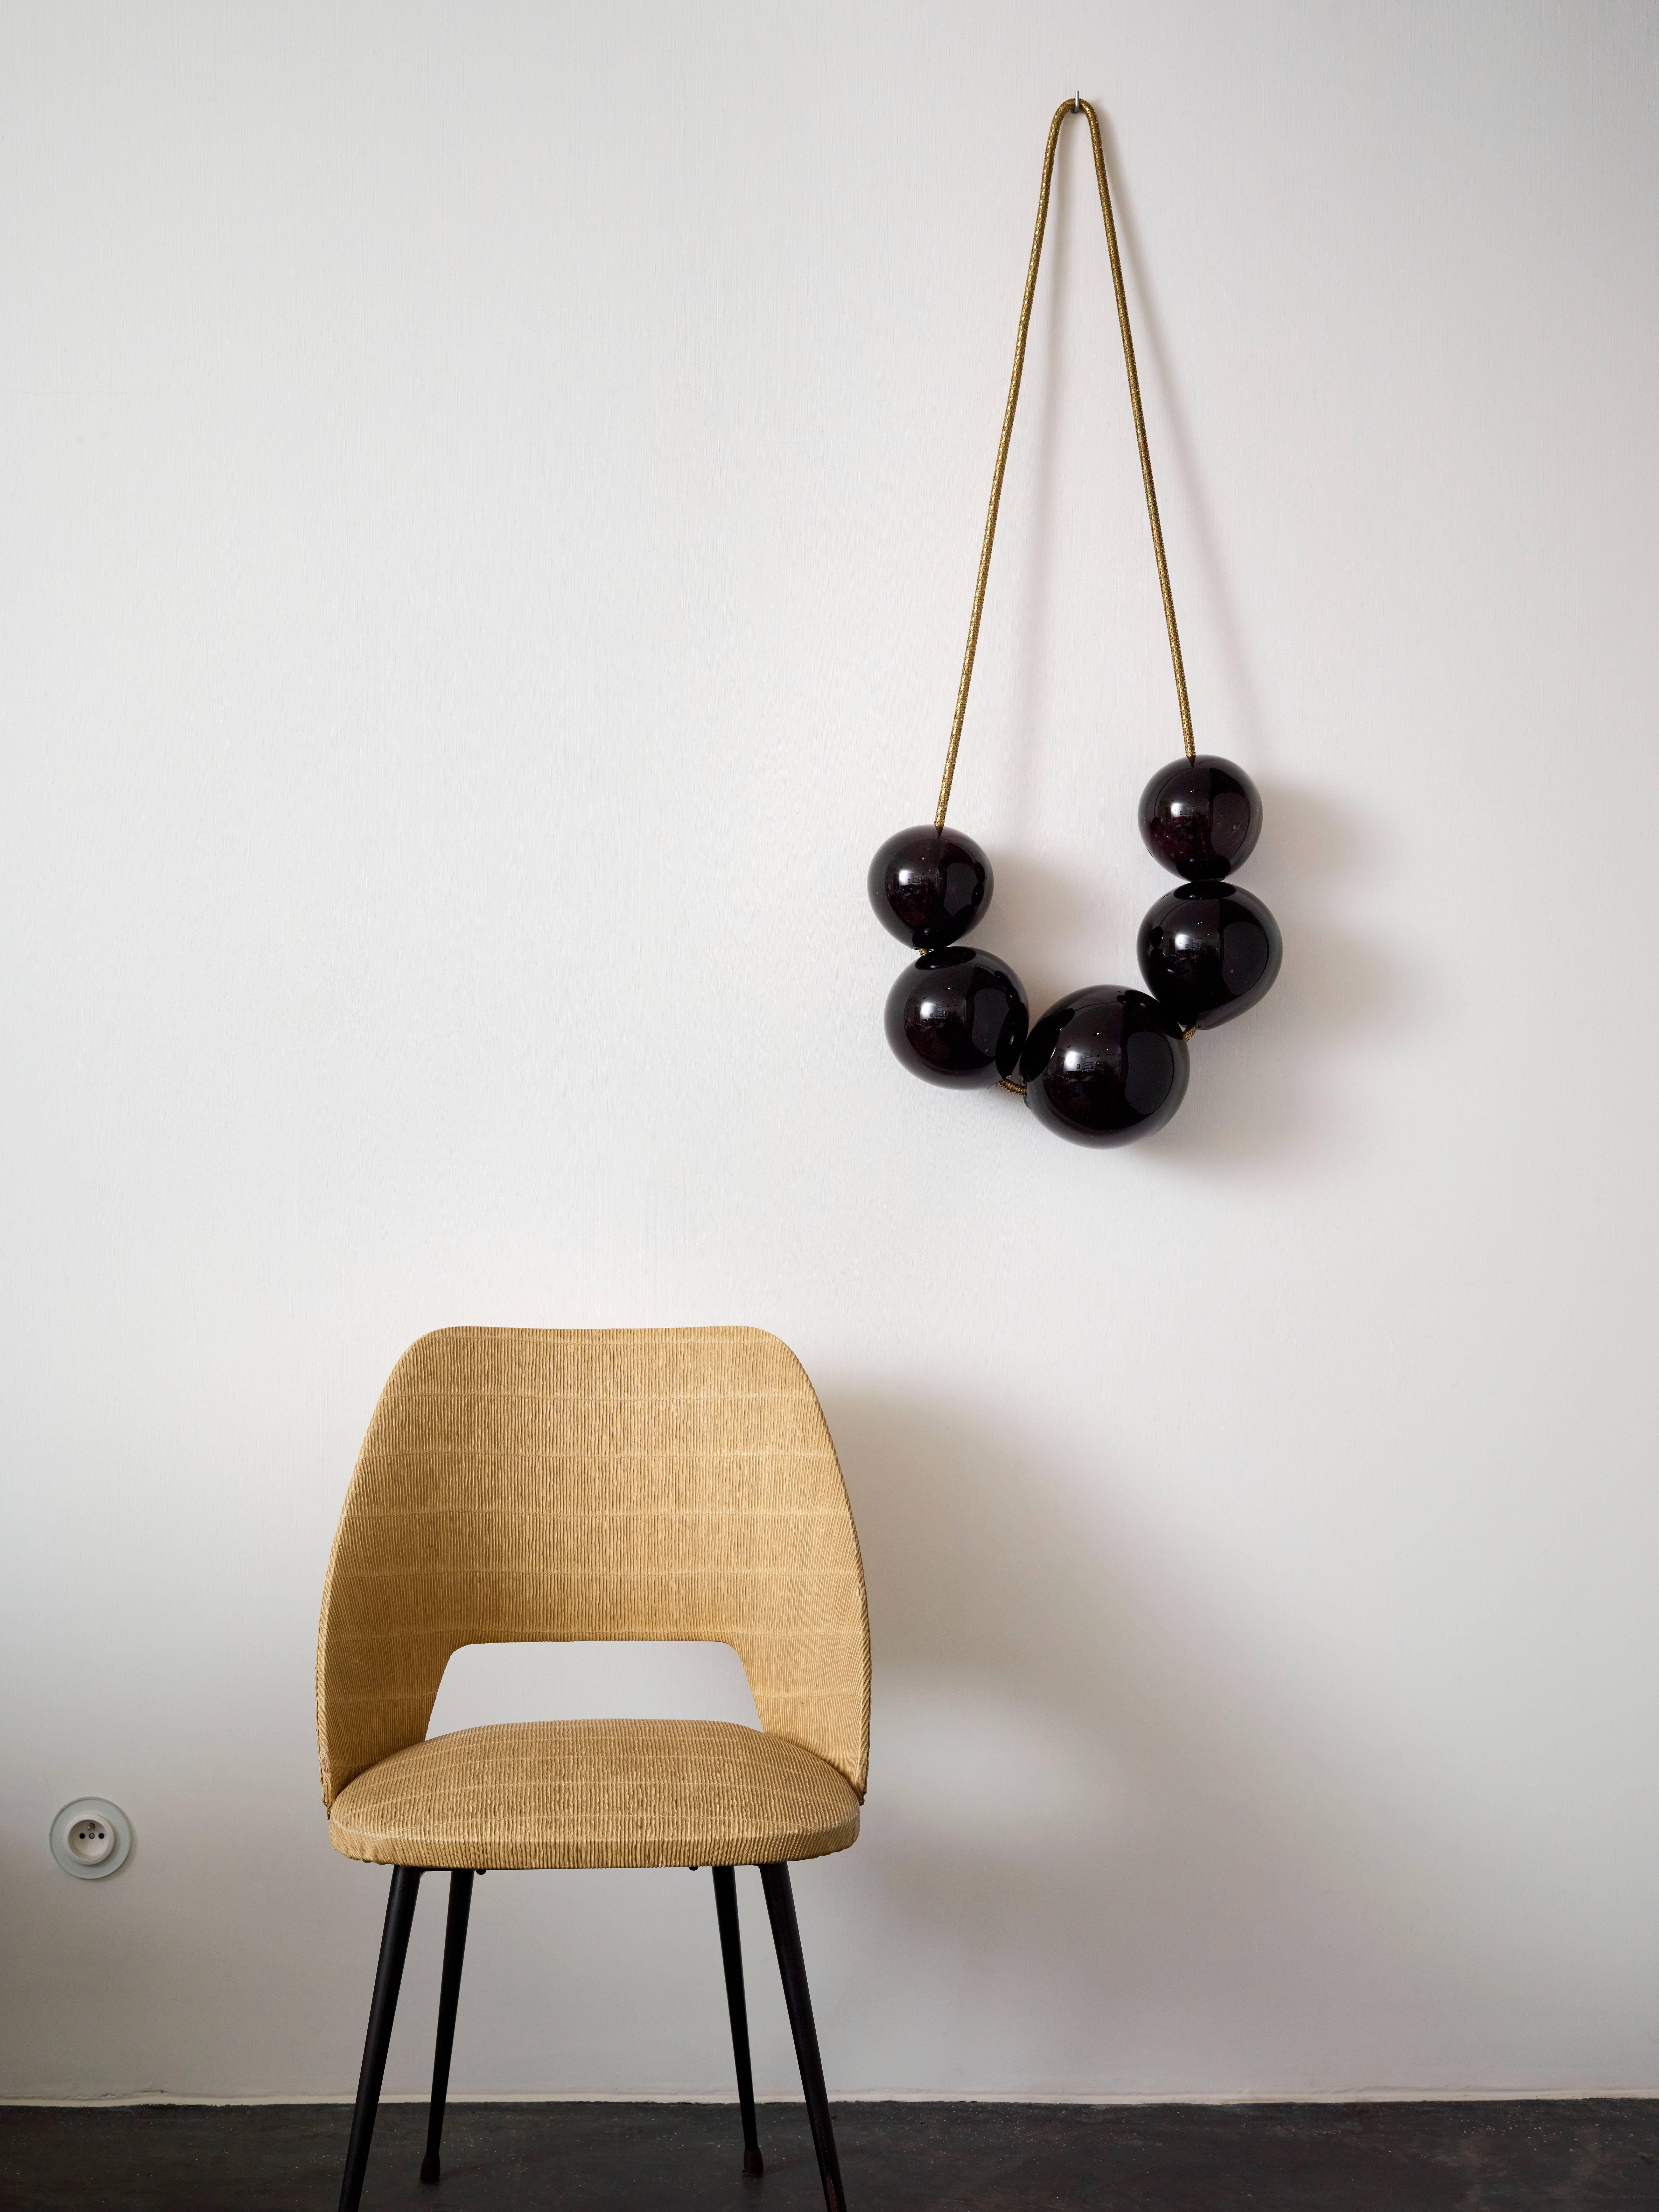 Contemporary wall hanging ornament with handblown black beads.
The ‘Bubbles’ looks like an oversized necklace. 
The handblown glass beads are embedd in a chain of high quality Italian brass.

There are two models available:
Large 20 cm x 50 cm